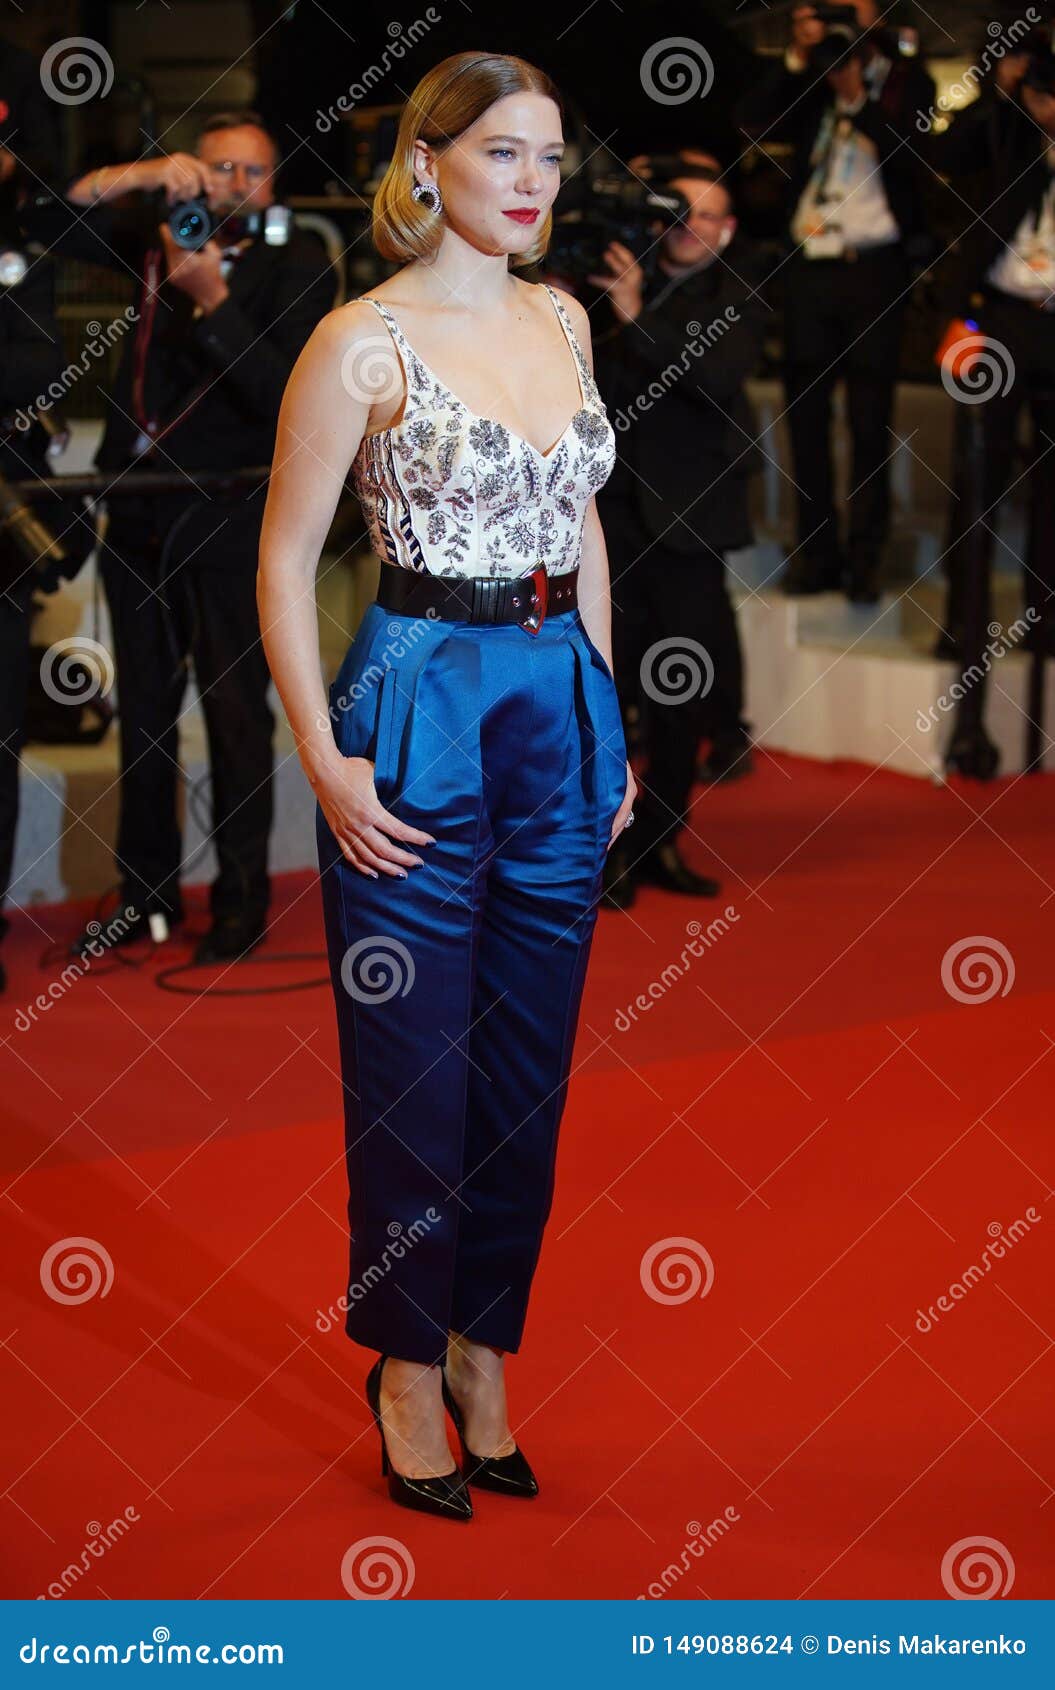 Lea Seydoux walking on the red carpet at the 92nd Annual Academy